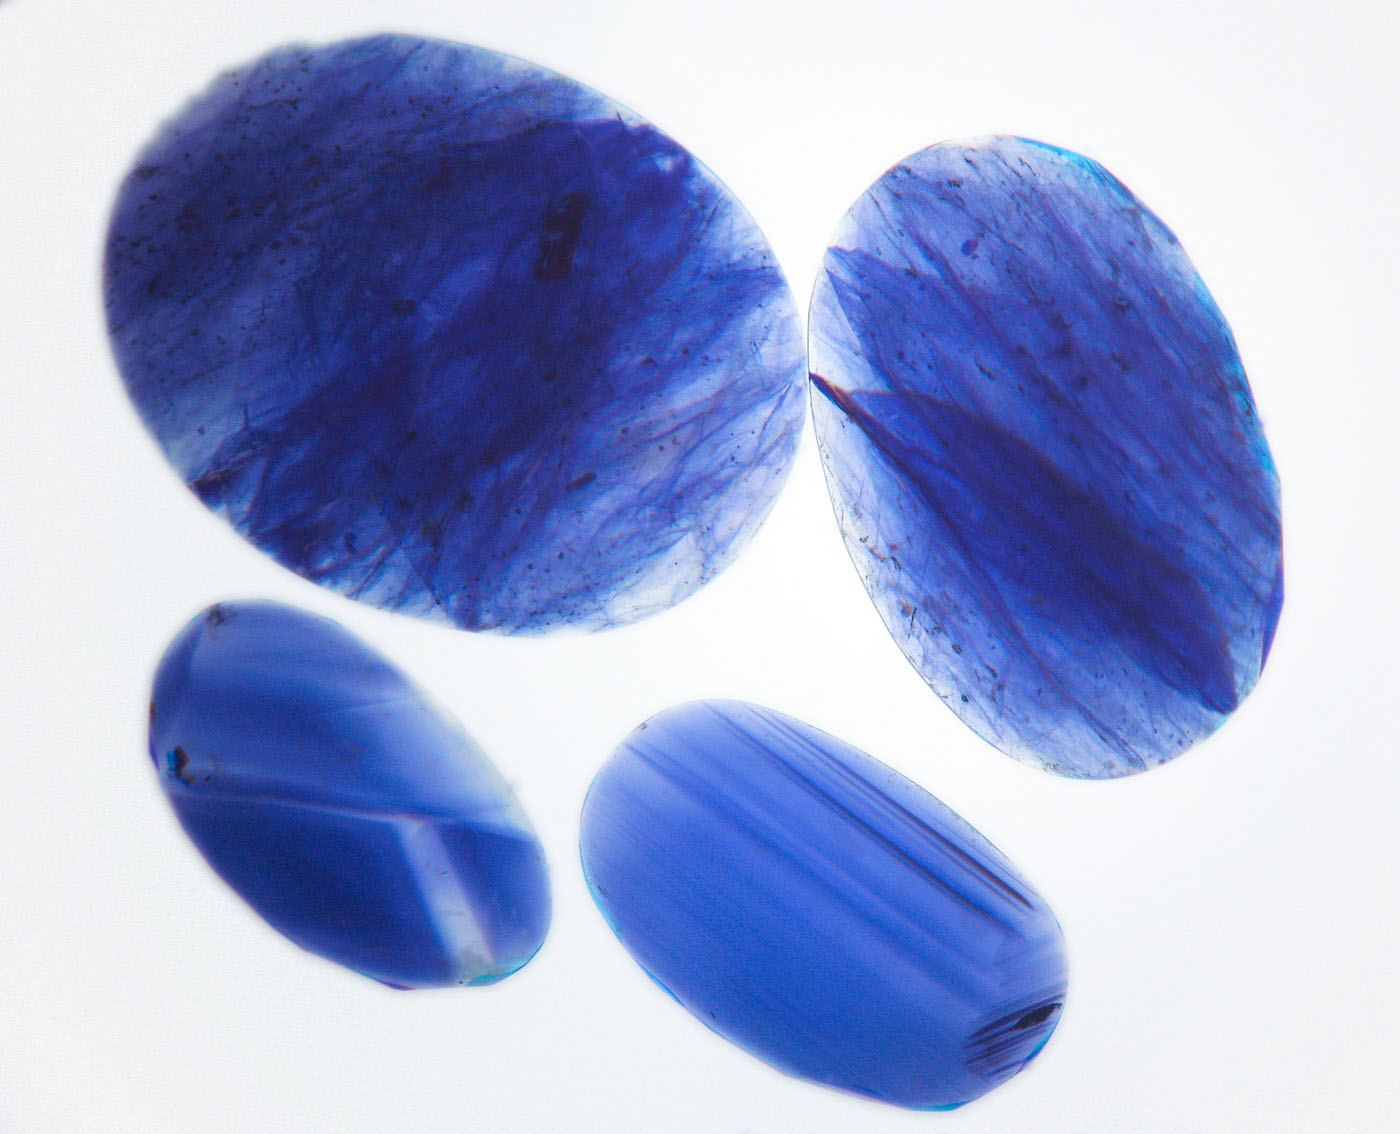 Figure 12. Immersion in di-iodomethane (methylene iodide) in diffuse light-field illumination quickly reveals the blue color concentrations in the cobalt-glass filled sapphires (top two stones), whereas natural sapphires show angular color zoning (lower two stones). Image corrected to remove yellow color of liquid. Photo: Wimon Manorotkul